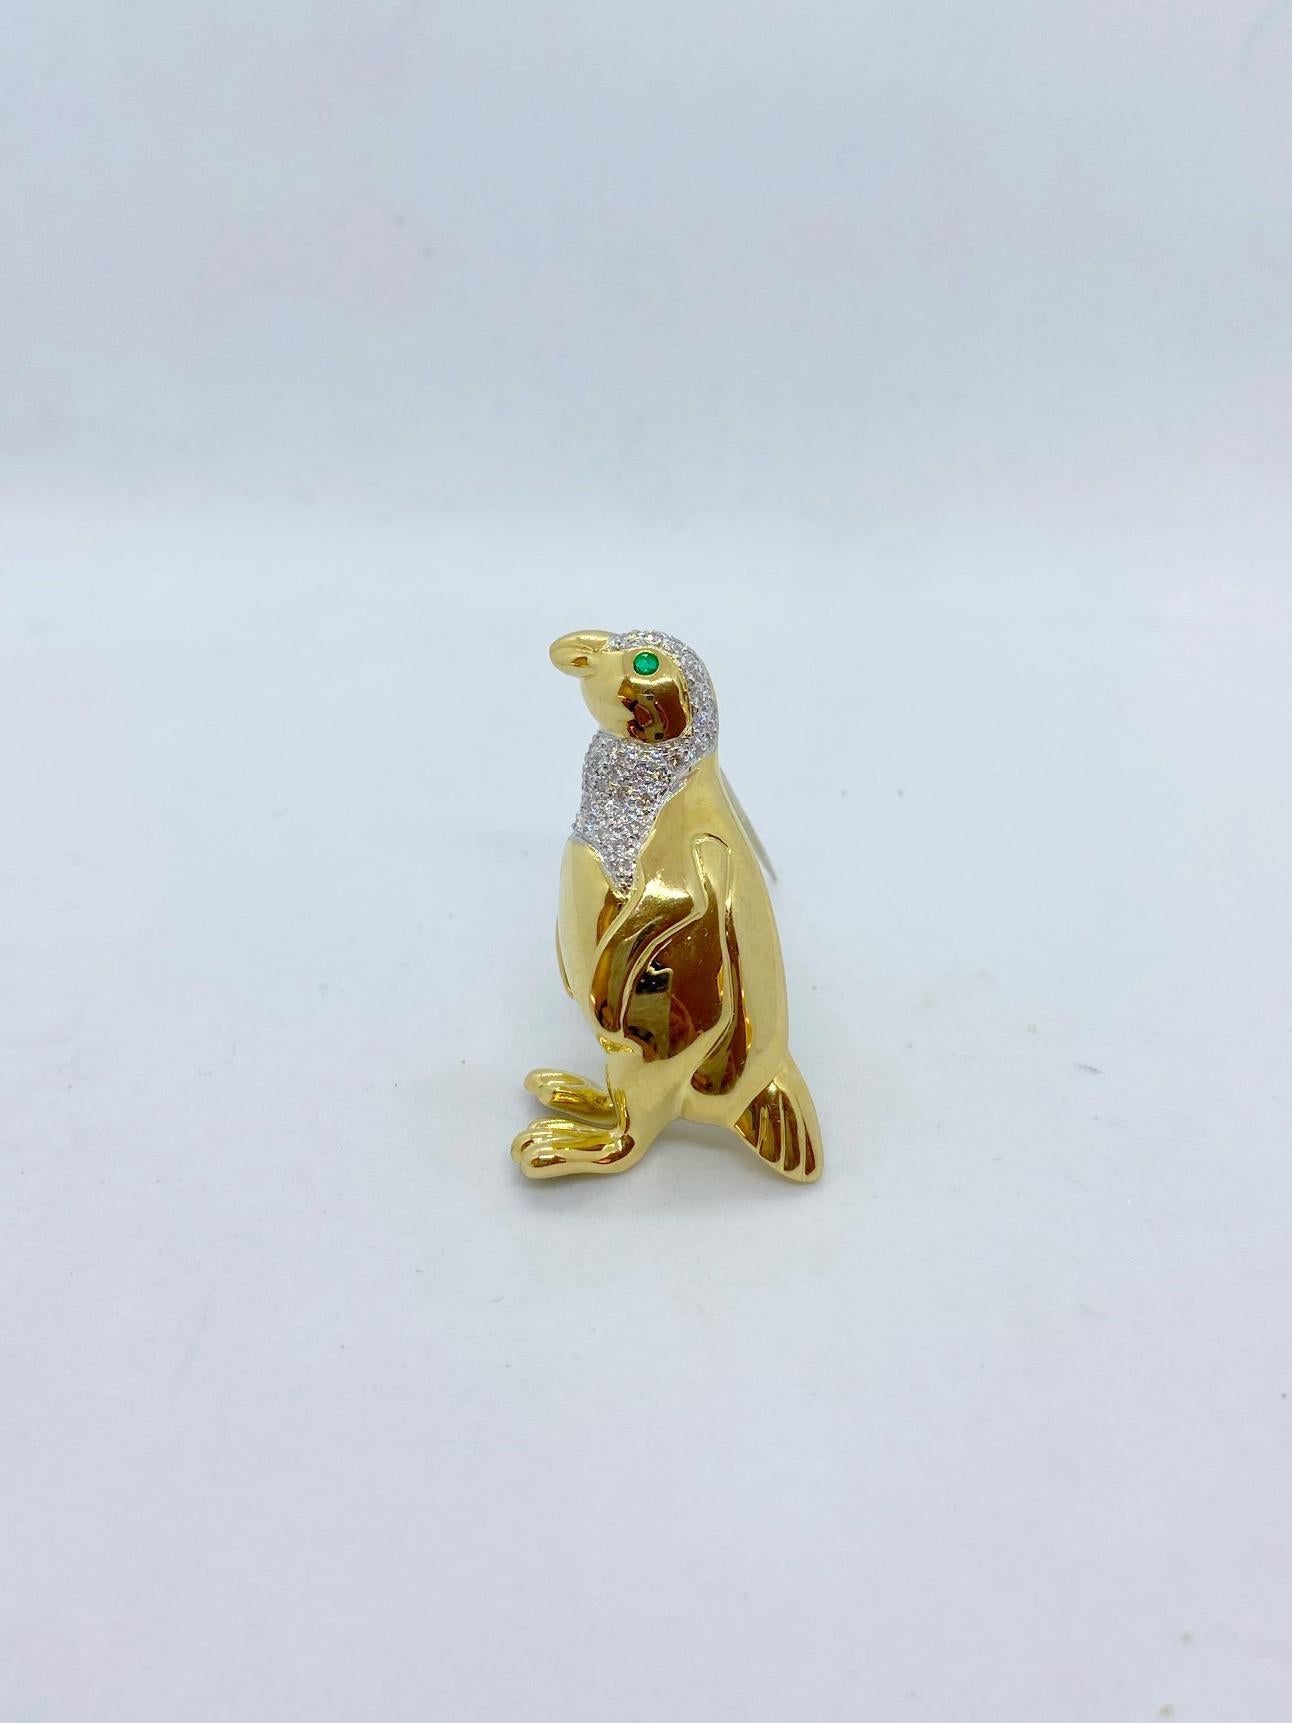 A large 18 karat yellow gold penguin brooch. The penguin is beautifully crafted in a high polished yellow gold. His neck and head are set with round brilliant diamonds in white gold. His eye is a round emerald. The penguin measures 1-7/8